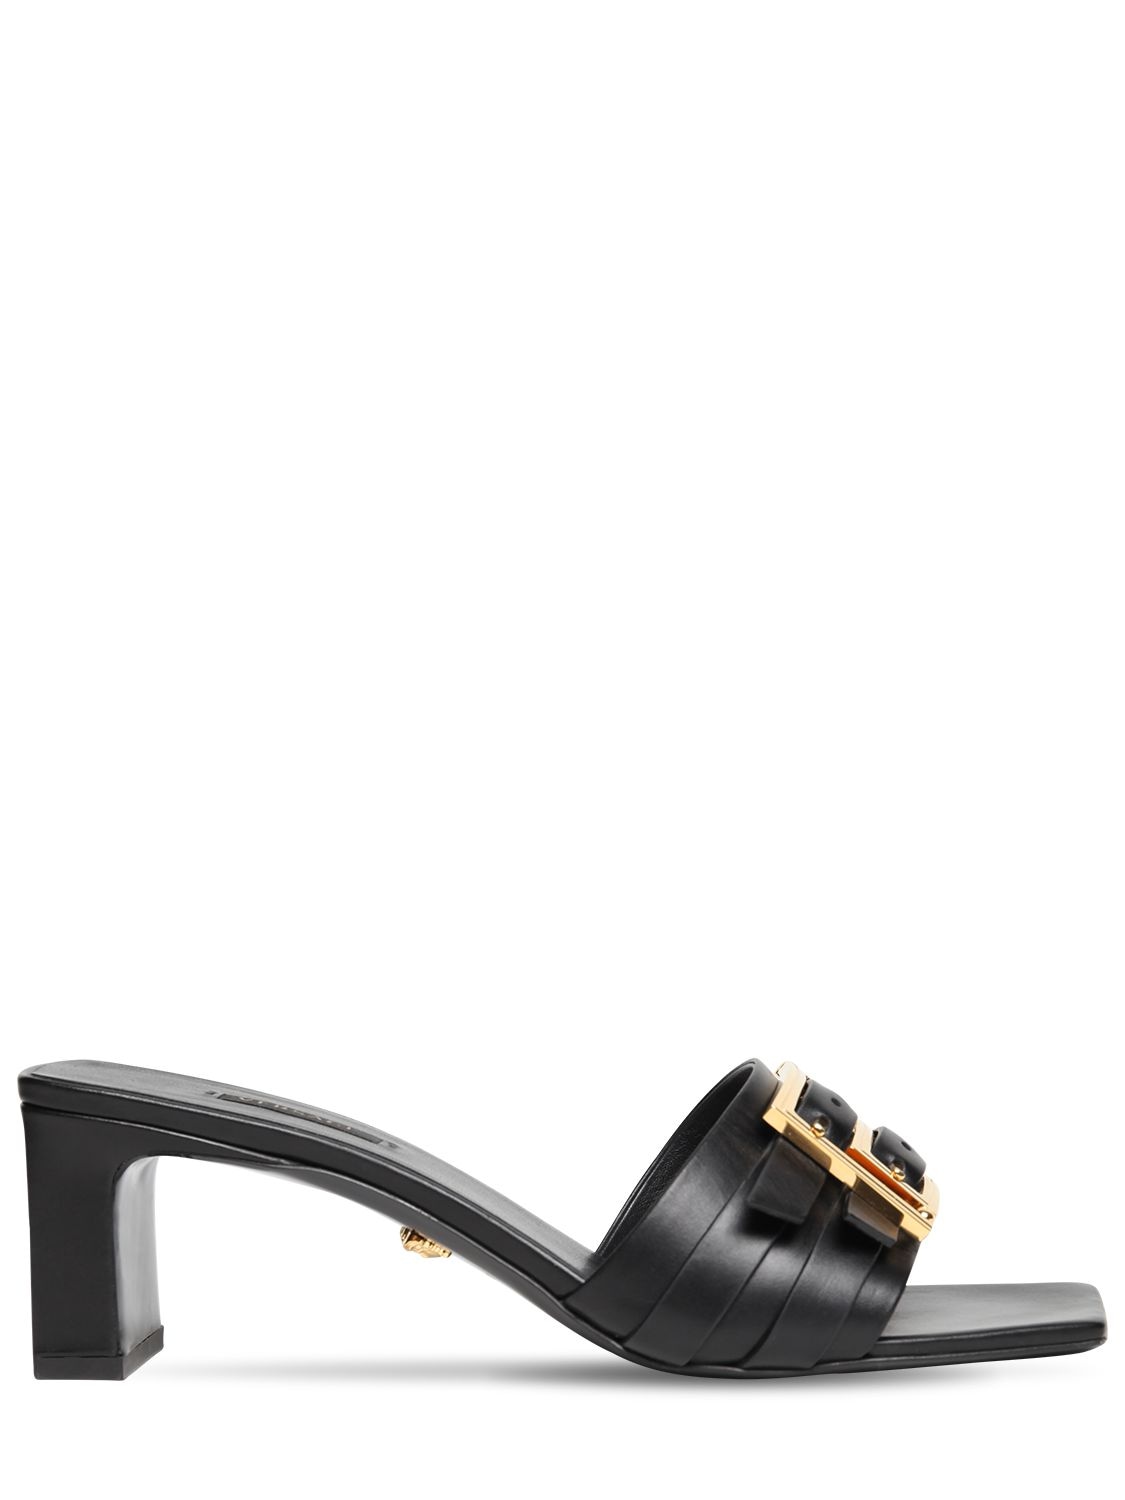 VERSACE 55MM LEATHER SANDALS,72IWTY005-RDQXT0G1